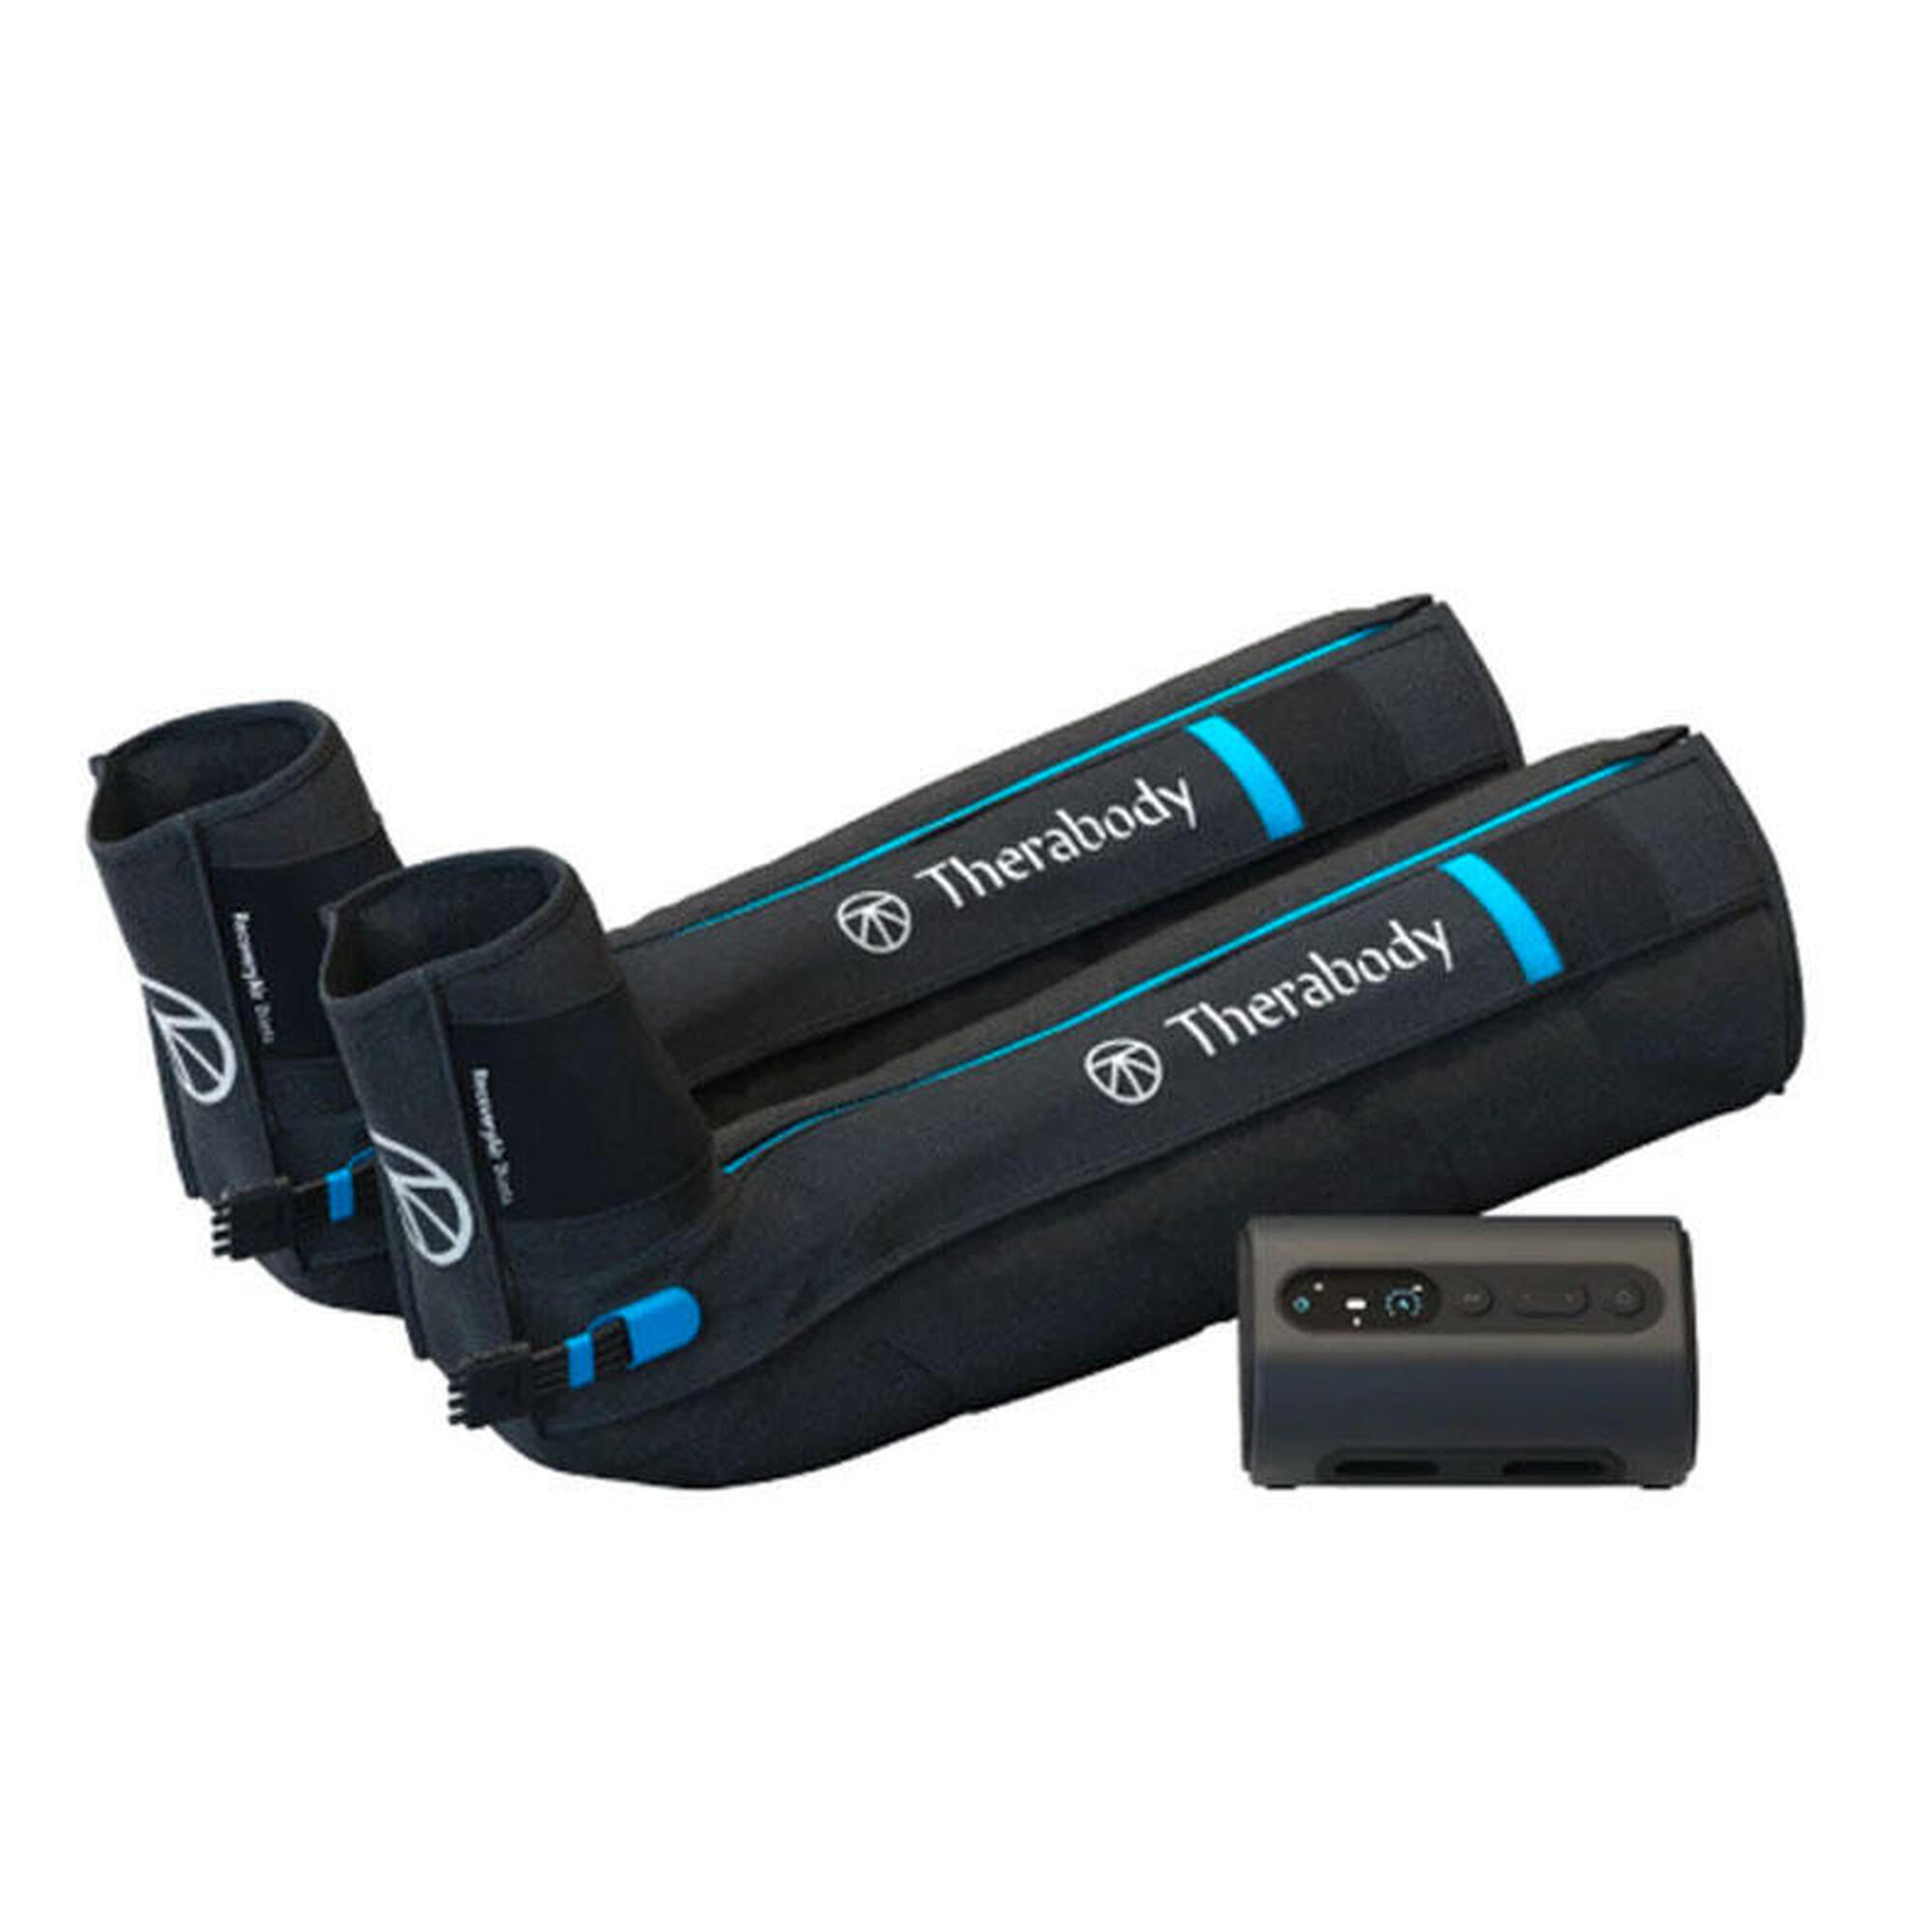 Therabody RecoveryAir Prime Compression Bundle - S